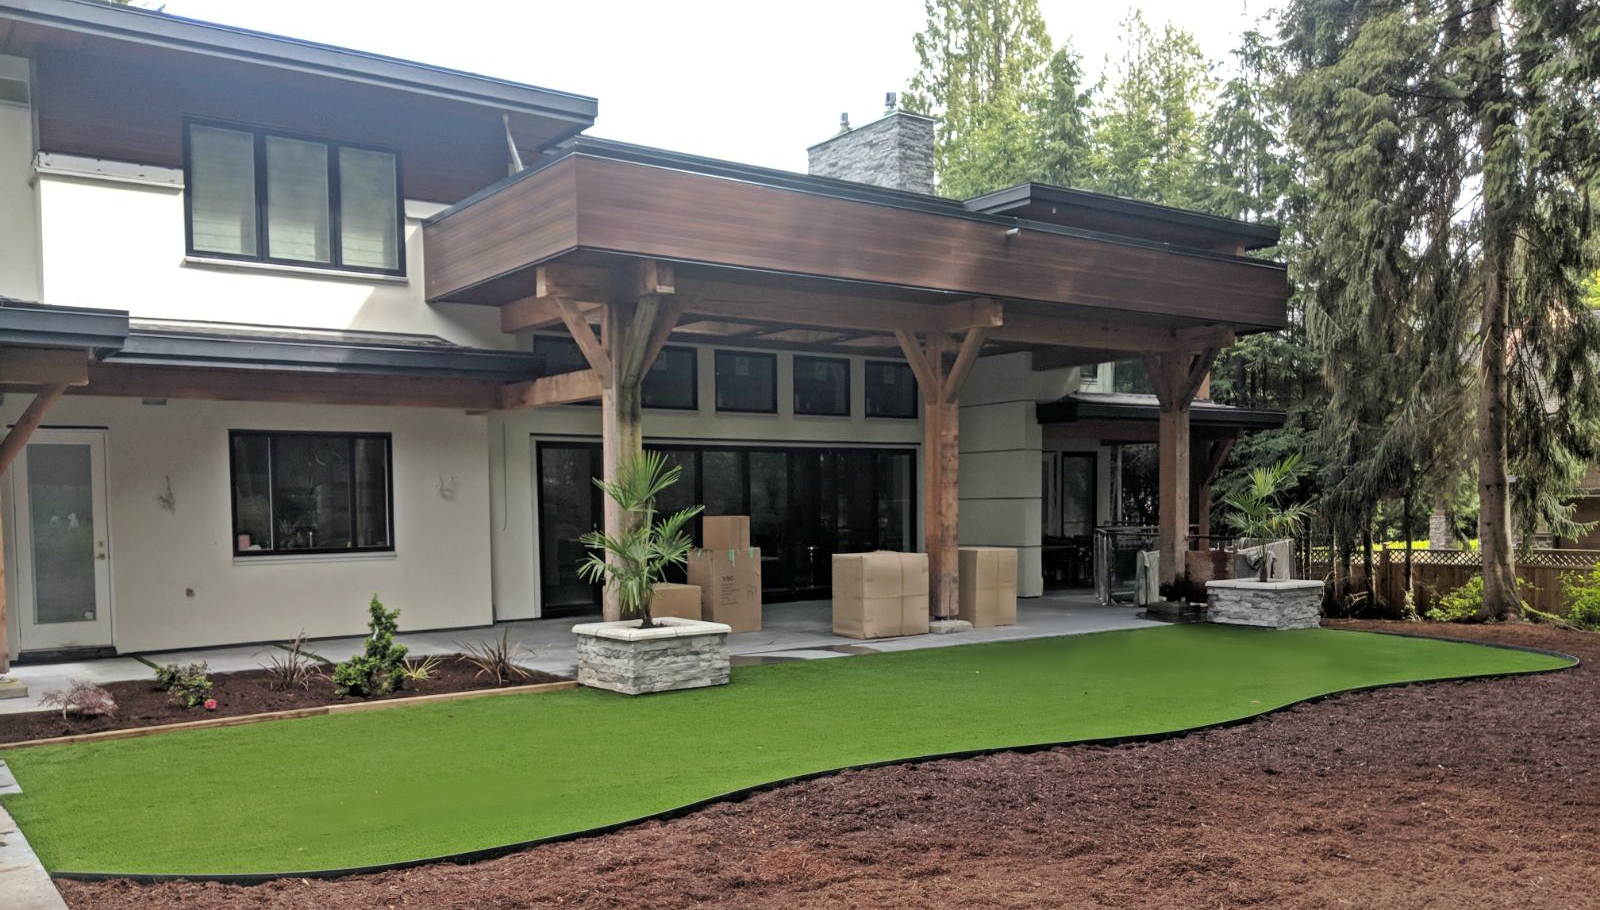 Premium Grass Blades Synthetic Artificial Turf: Evergreen Installation in South Surrey